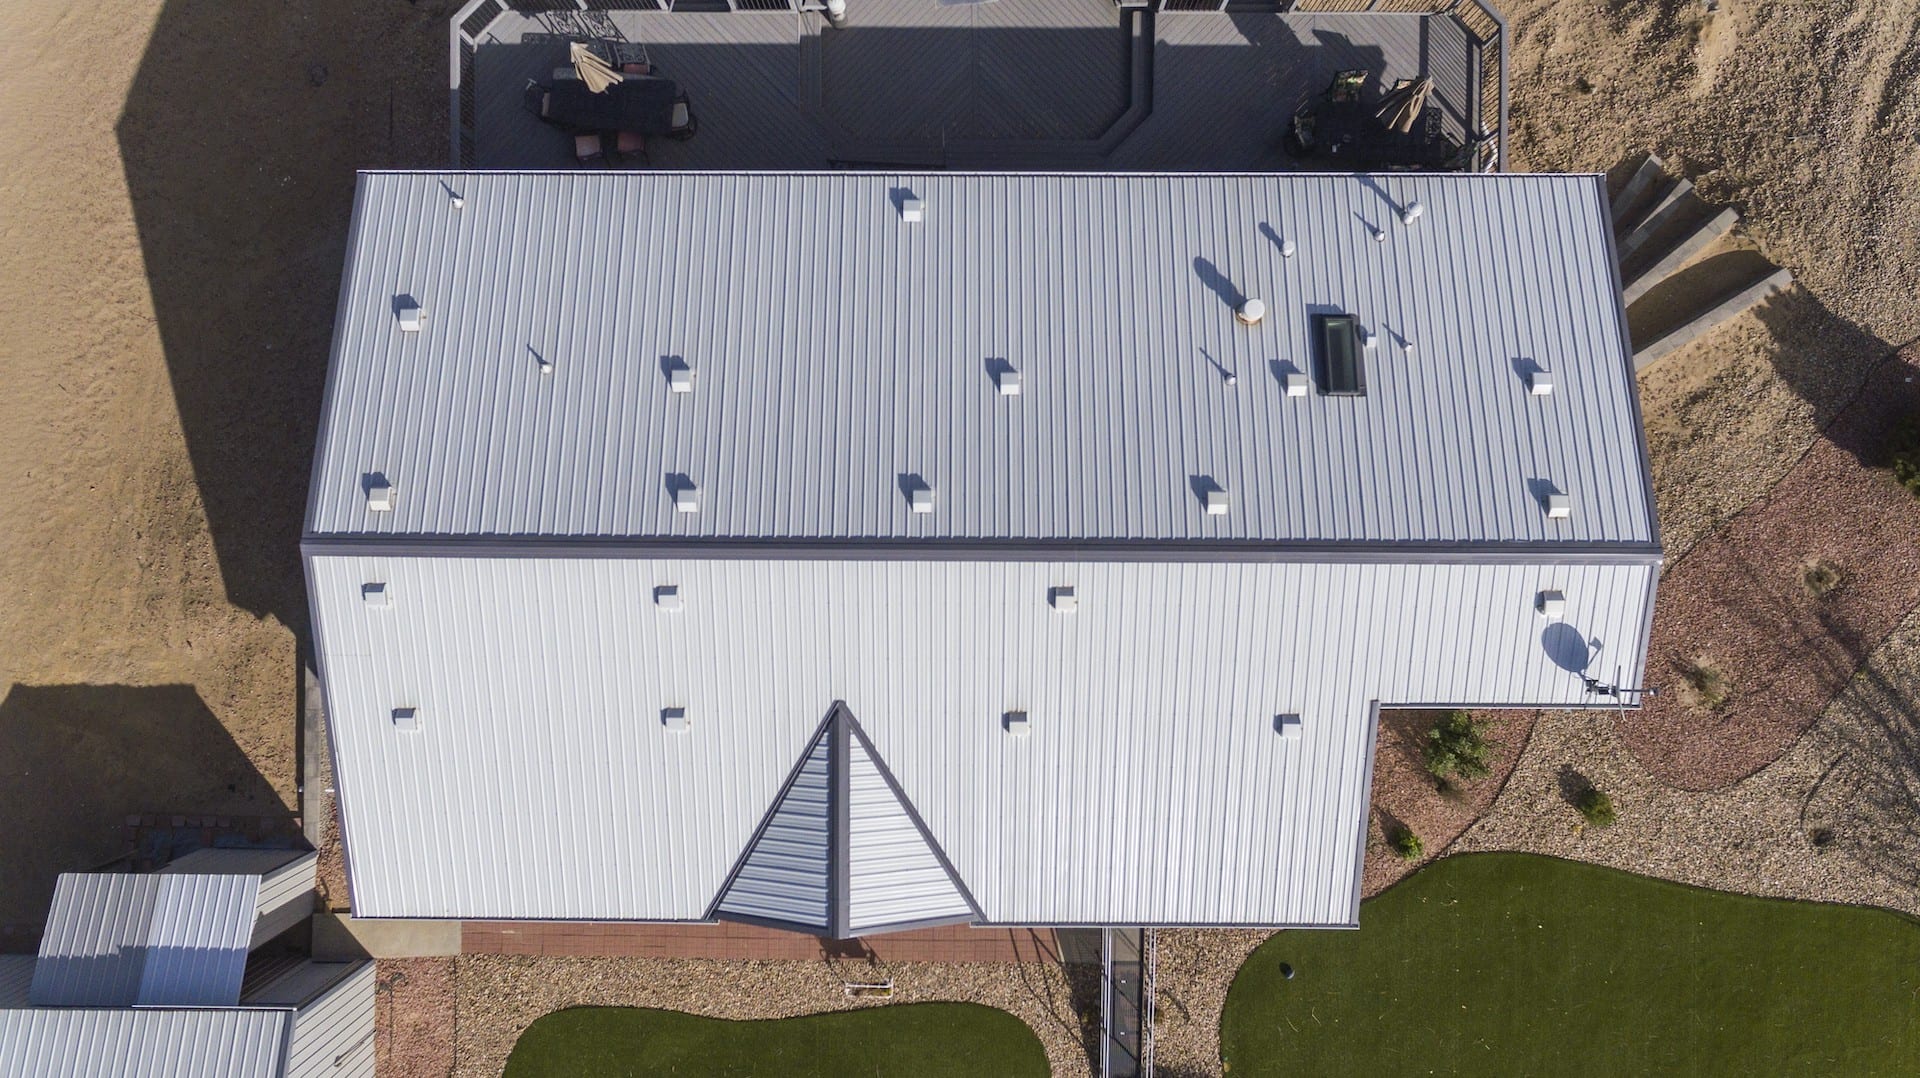 Exposed Fastener metal roofing on commercial building by Northern Lights Exteriors